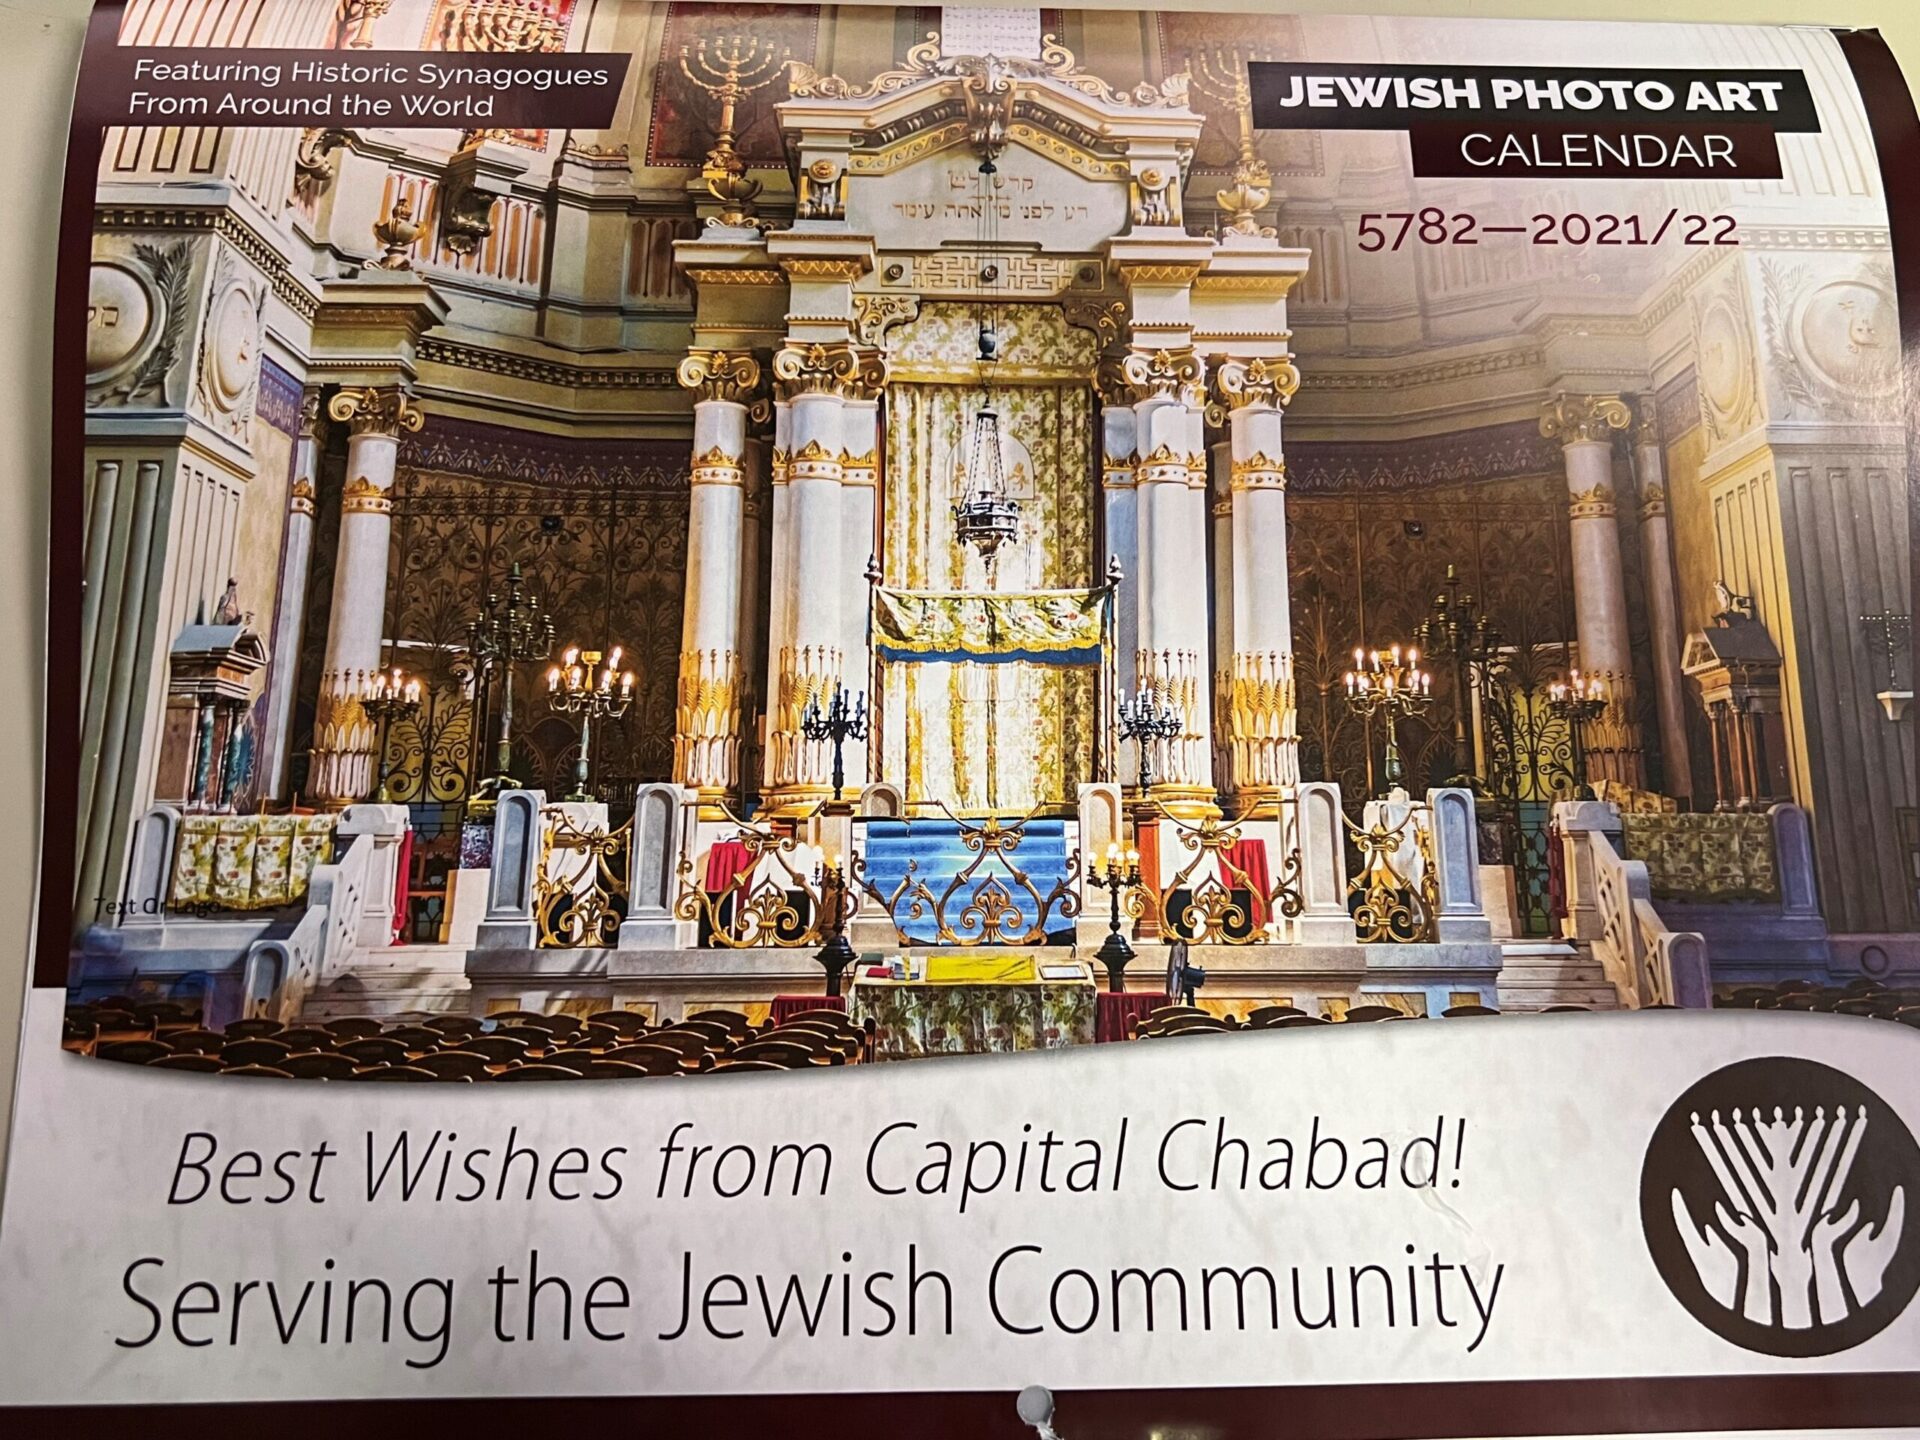 A new Jewish year is coming; Chabad art calendar available